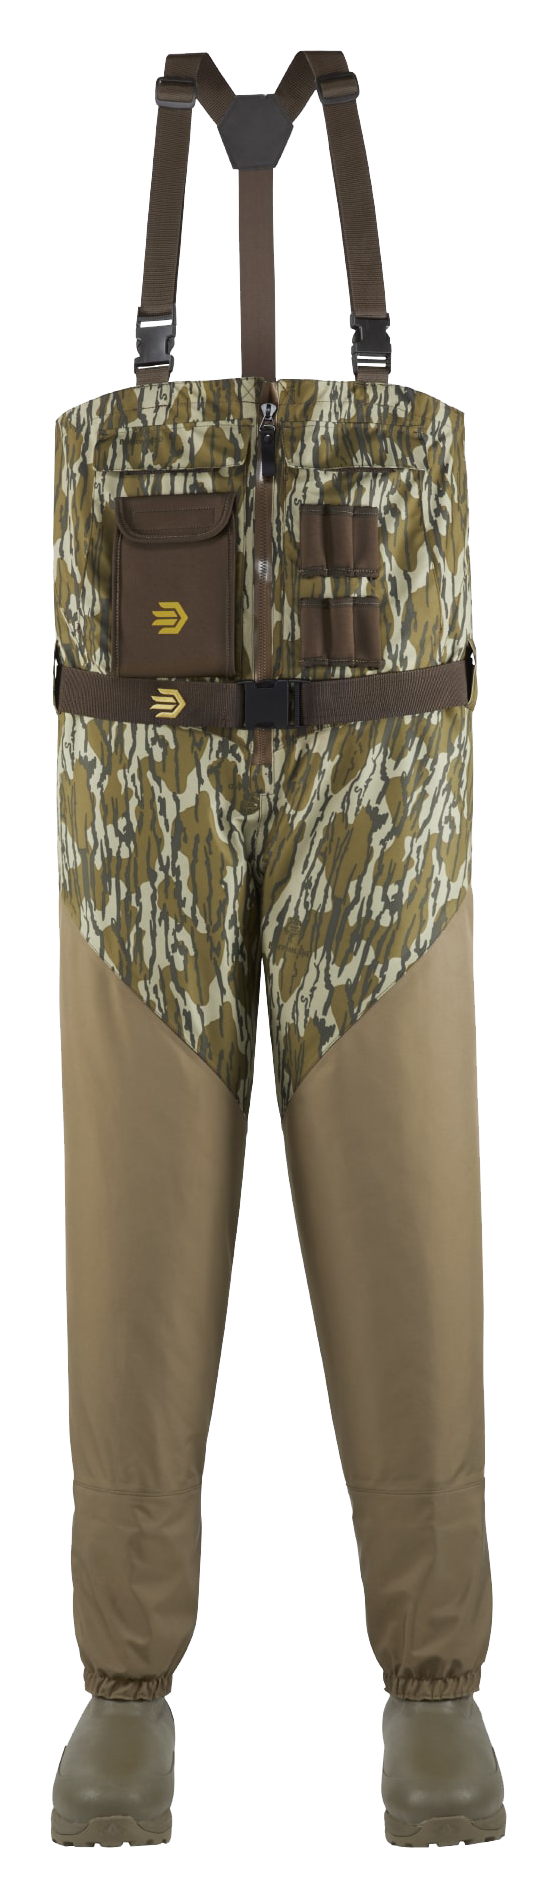 LaCrosse Alpha Agility Select Insulated Front-Zip Breathable Hunting Waders for Men - Mossy Oak Original Bottomland - 13/King